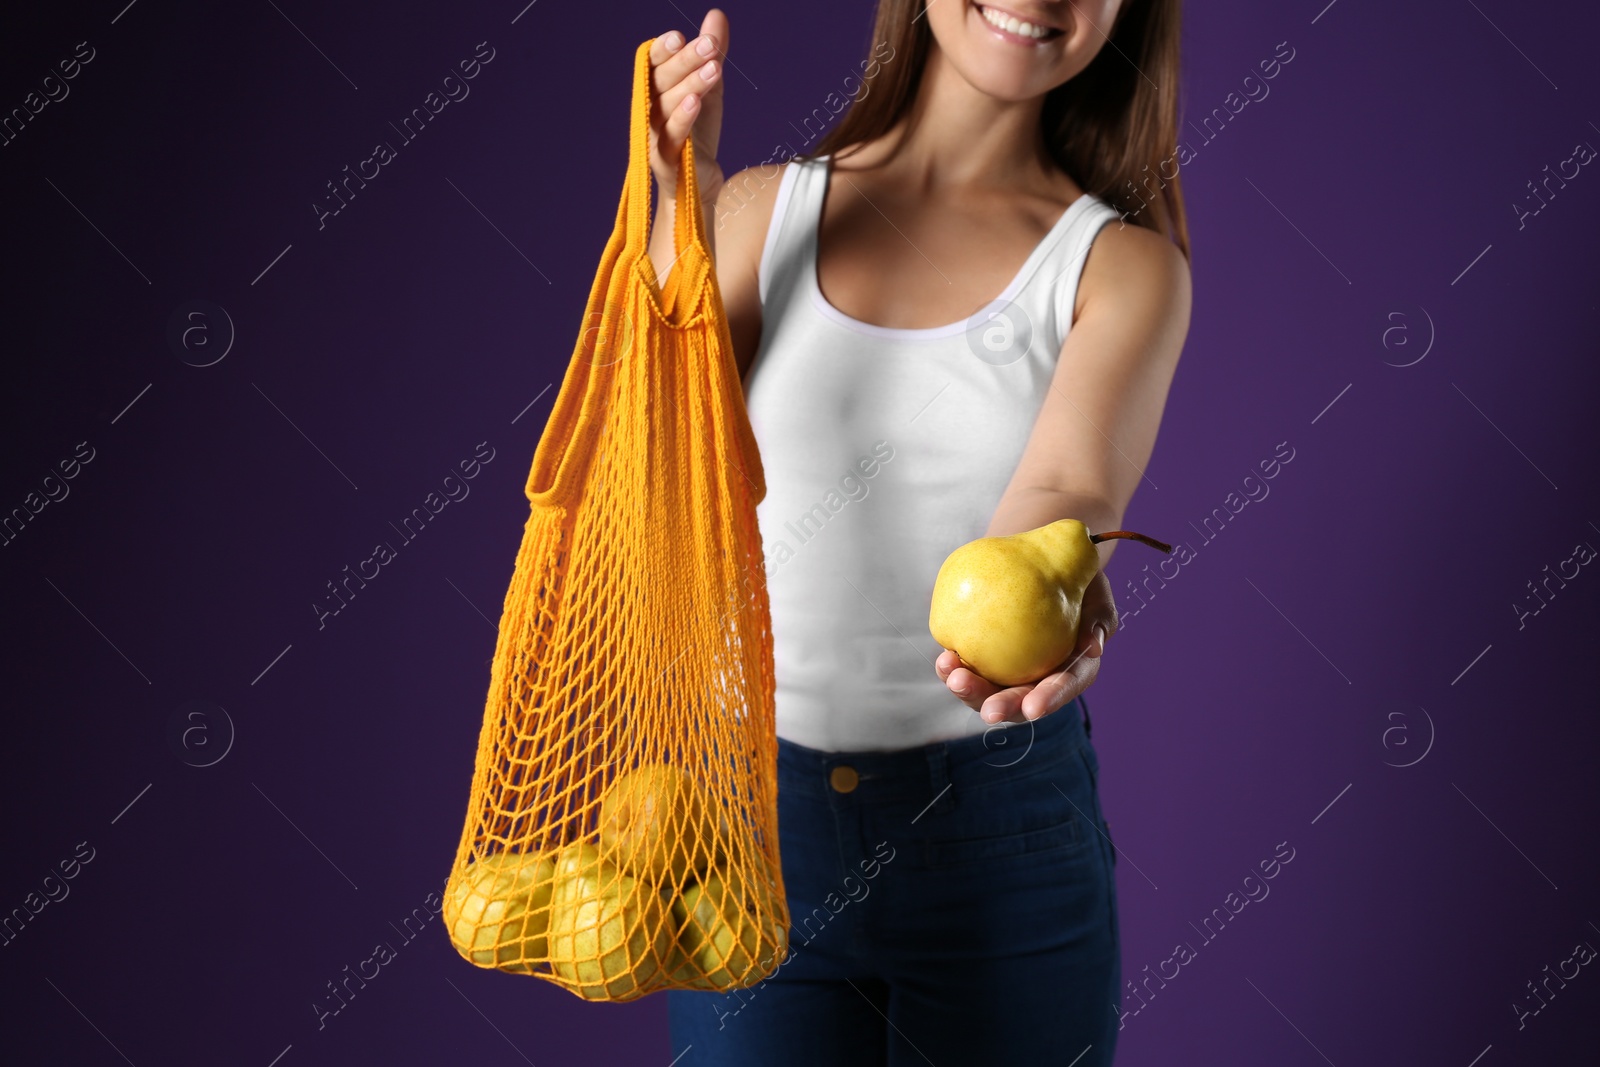 Photo of Woman holding net bag with fresh ripe pears on purple background, closeup